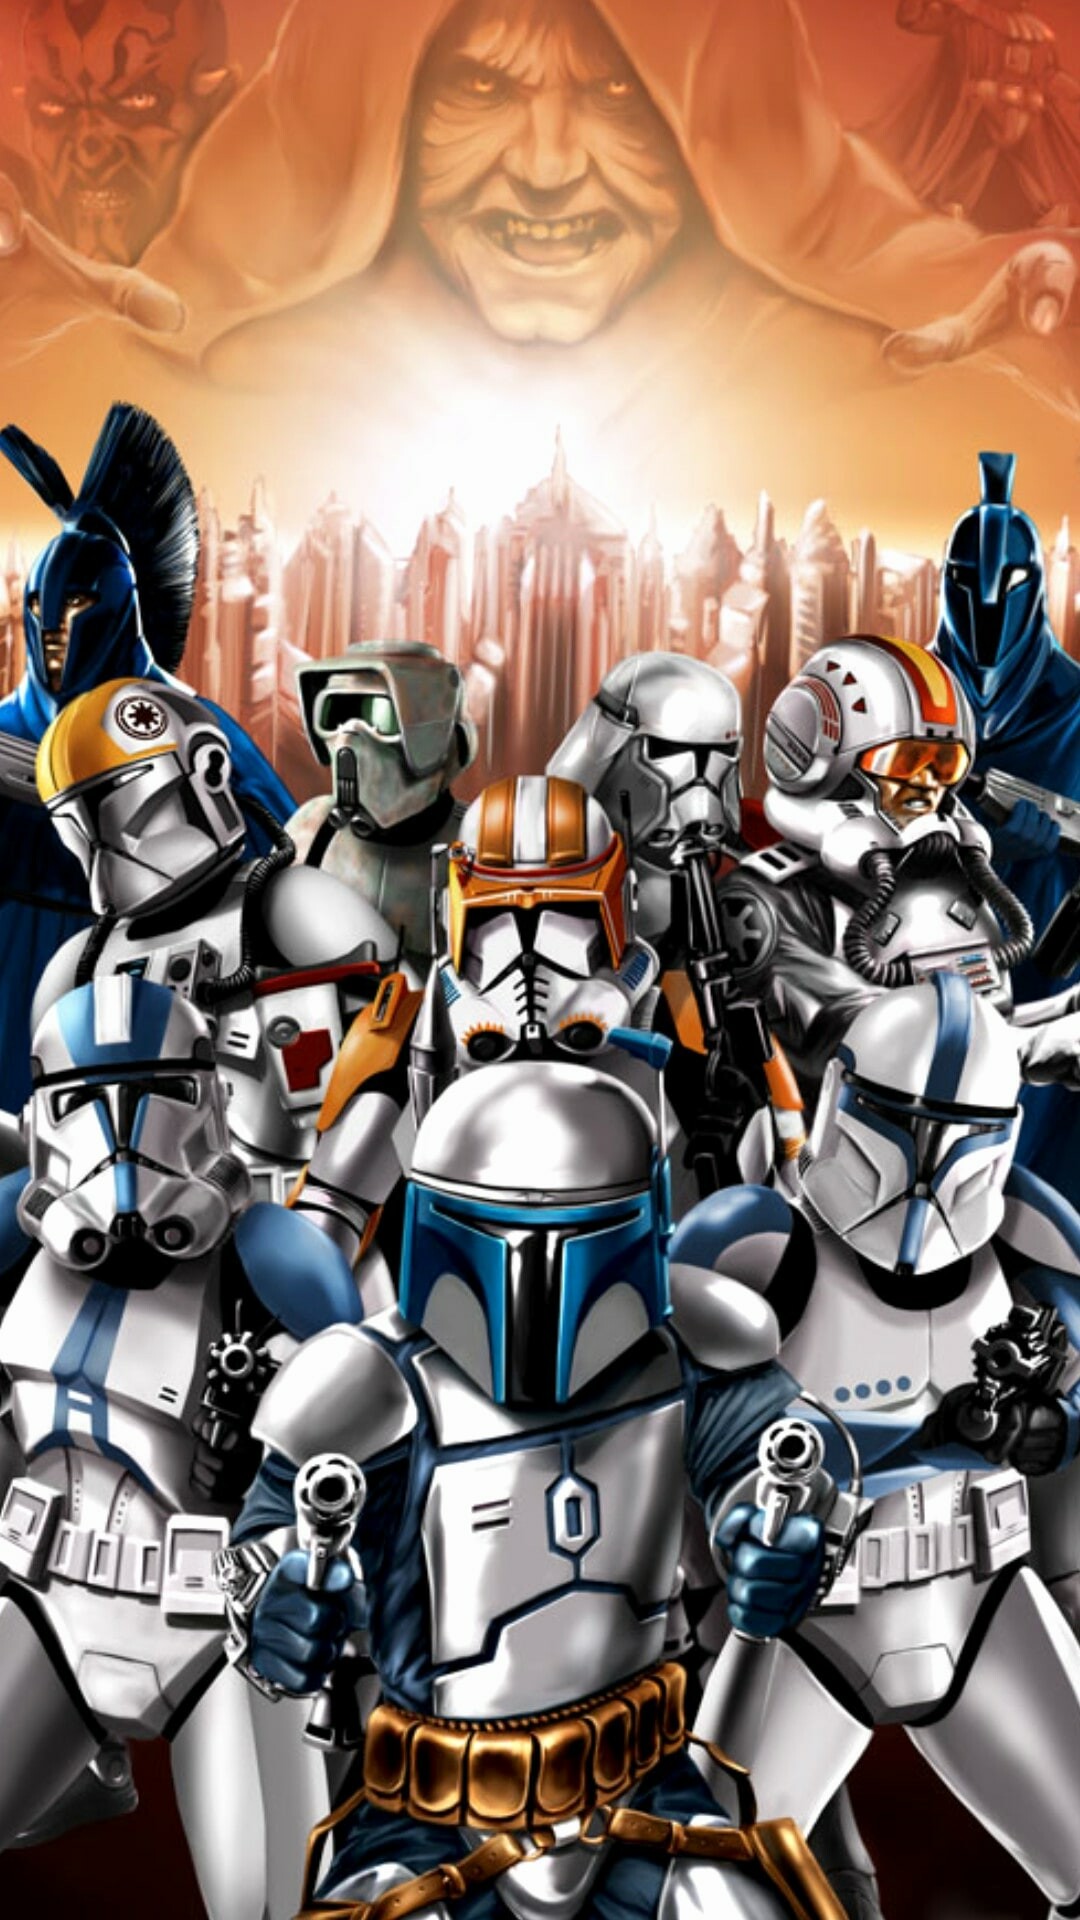 Star Wars: The Clone Wars, An American computer-animated television series created by George Lucas. 1080x1920 Full HD Wallpaper.